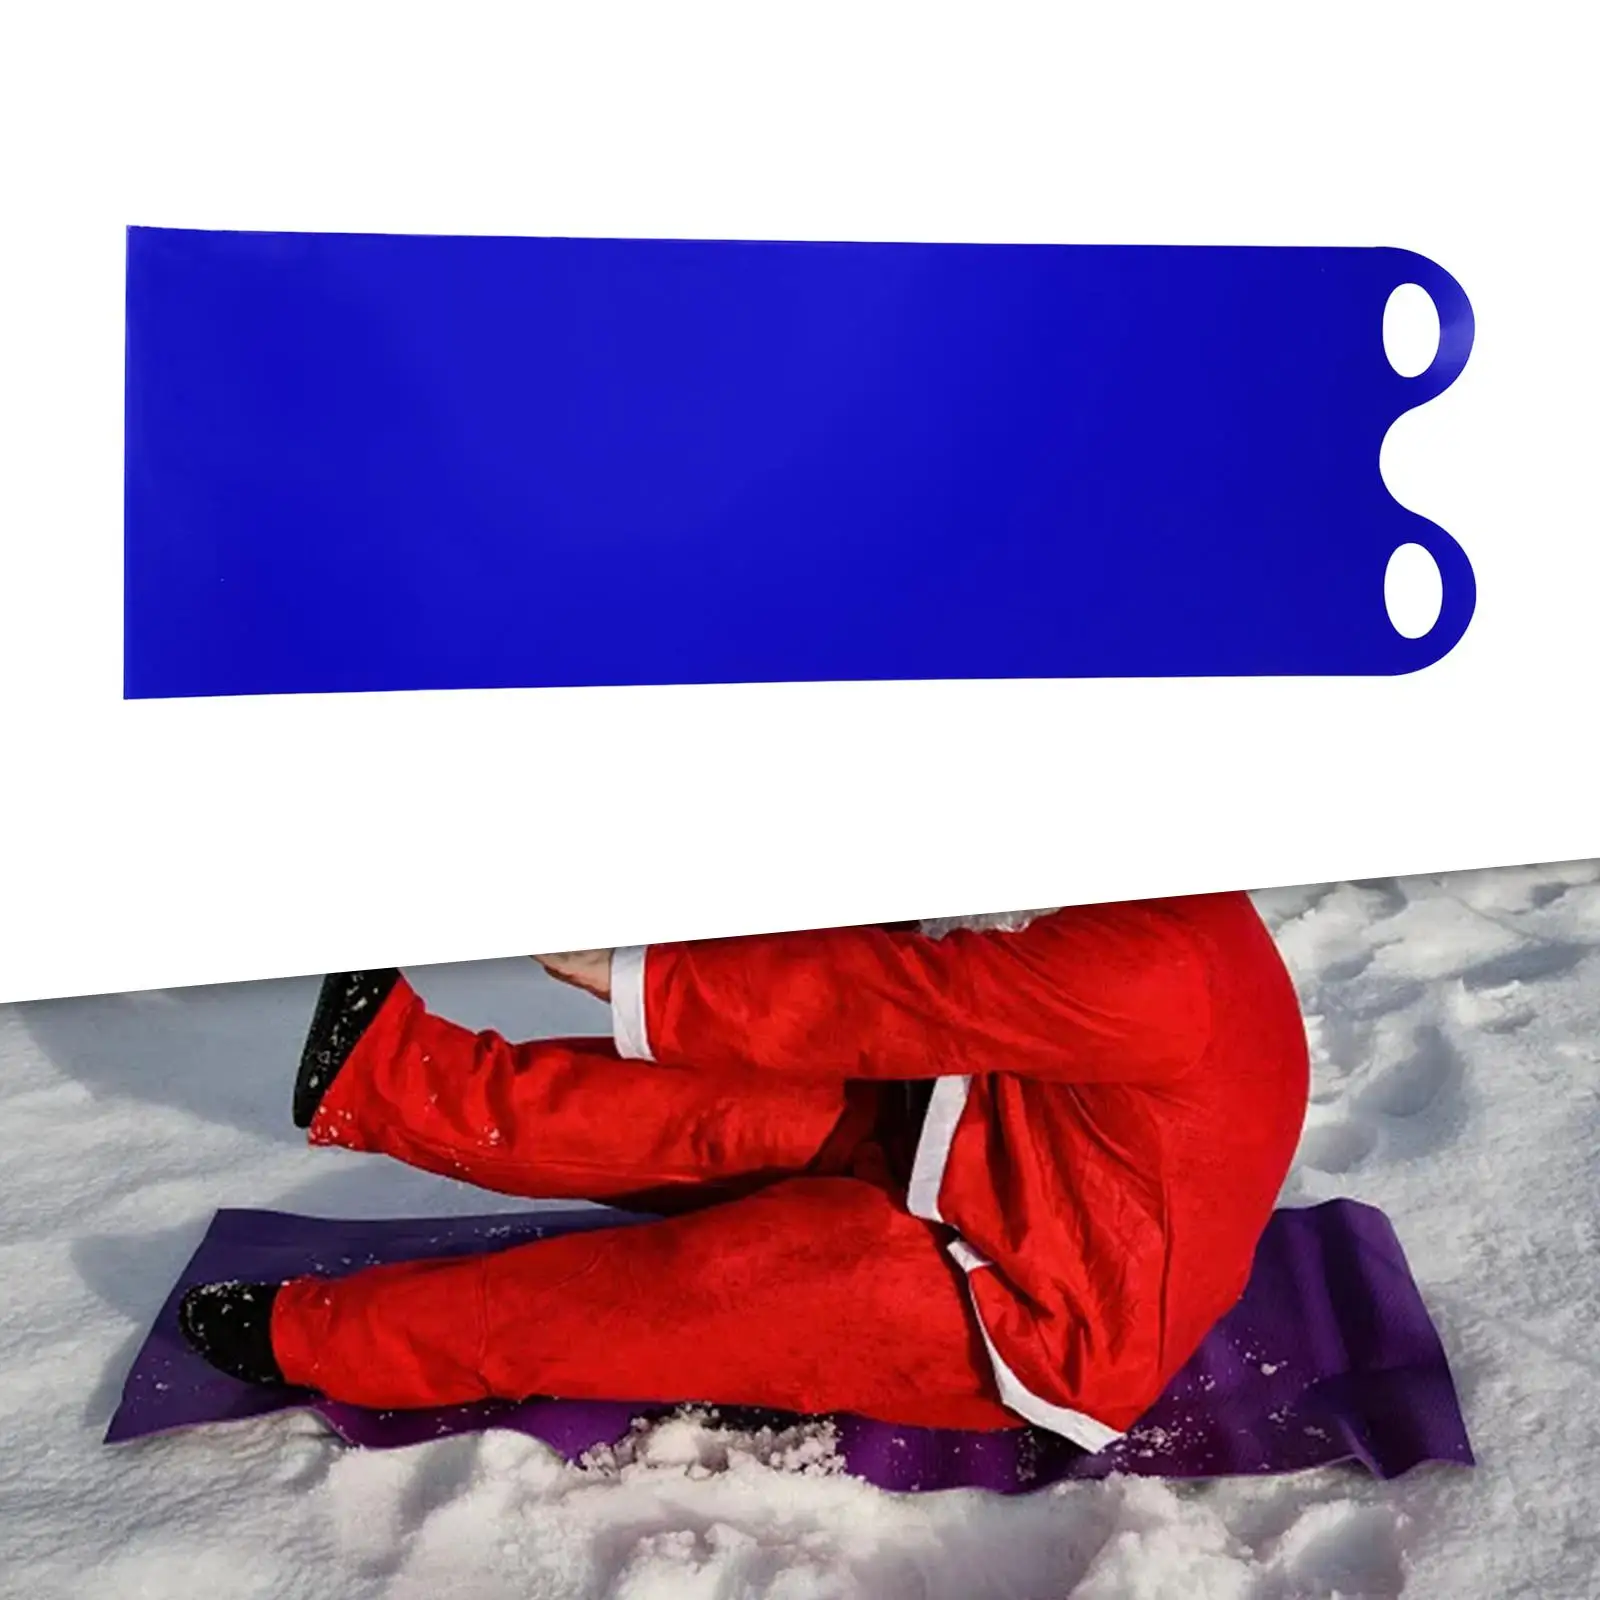 Snow Slide Mat with Handles Portable Roll up Sled Mat for Winter Toy Snow Skiing